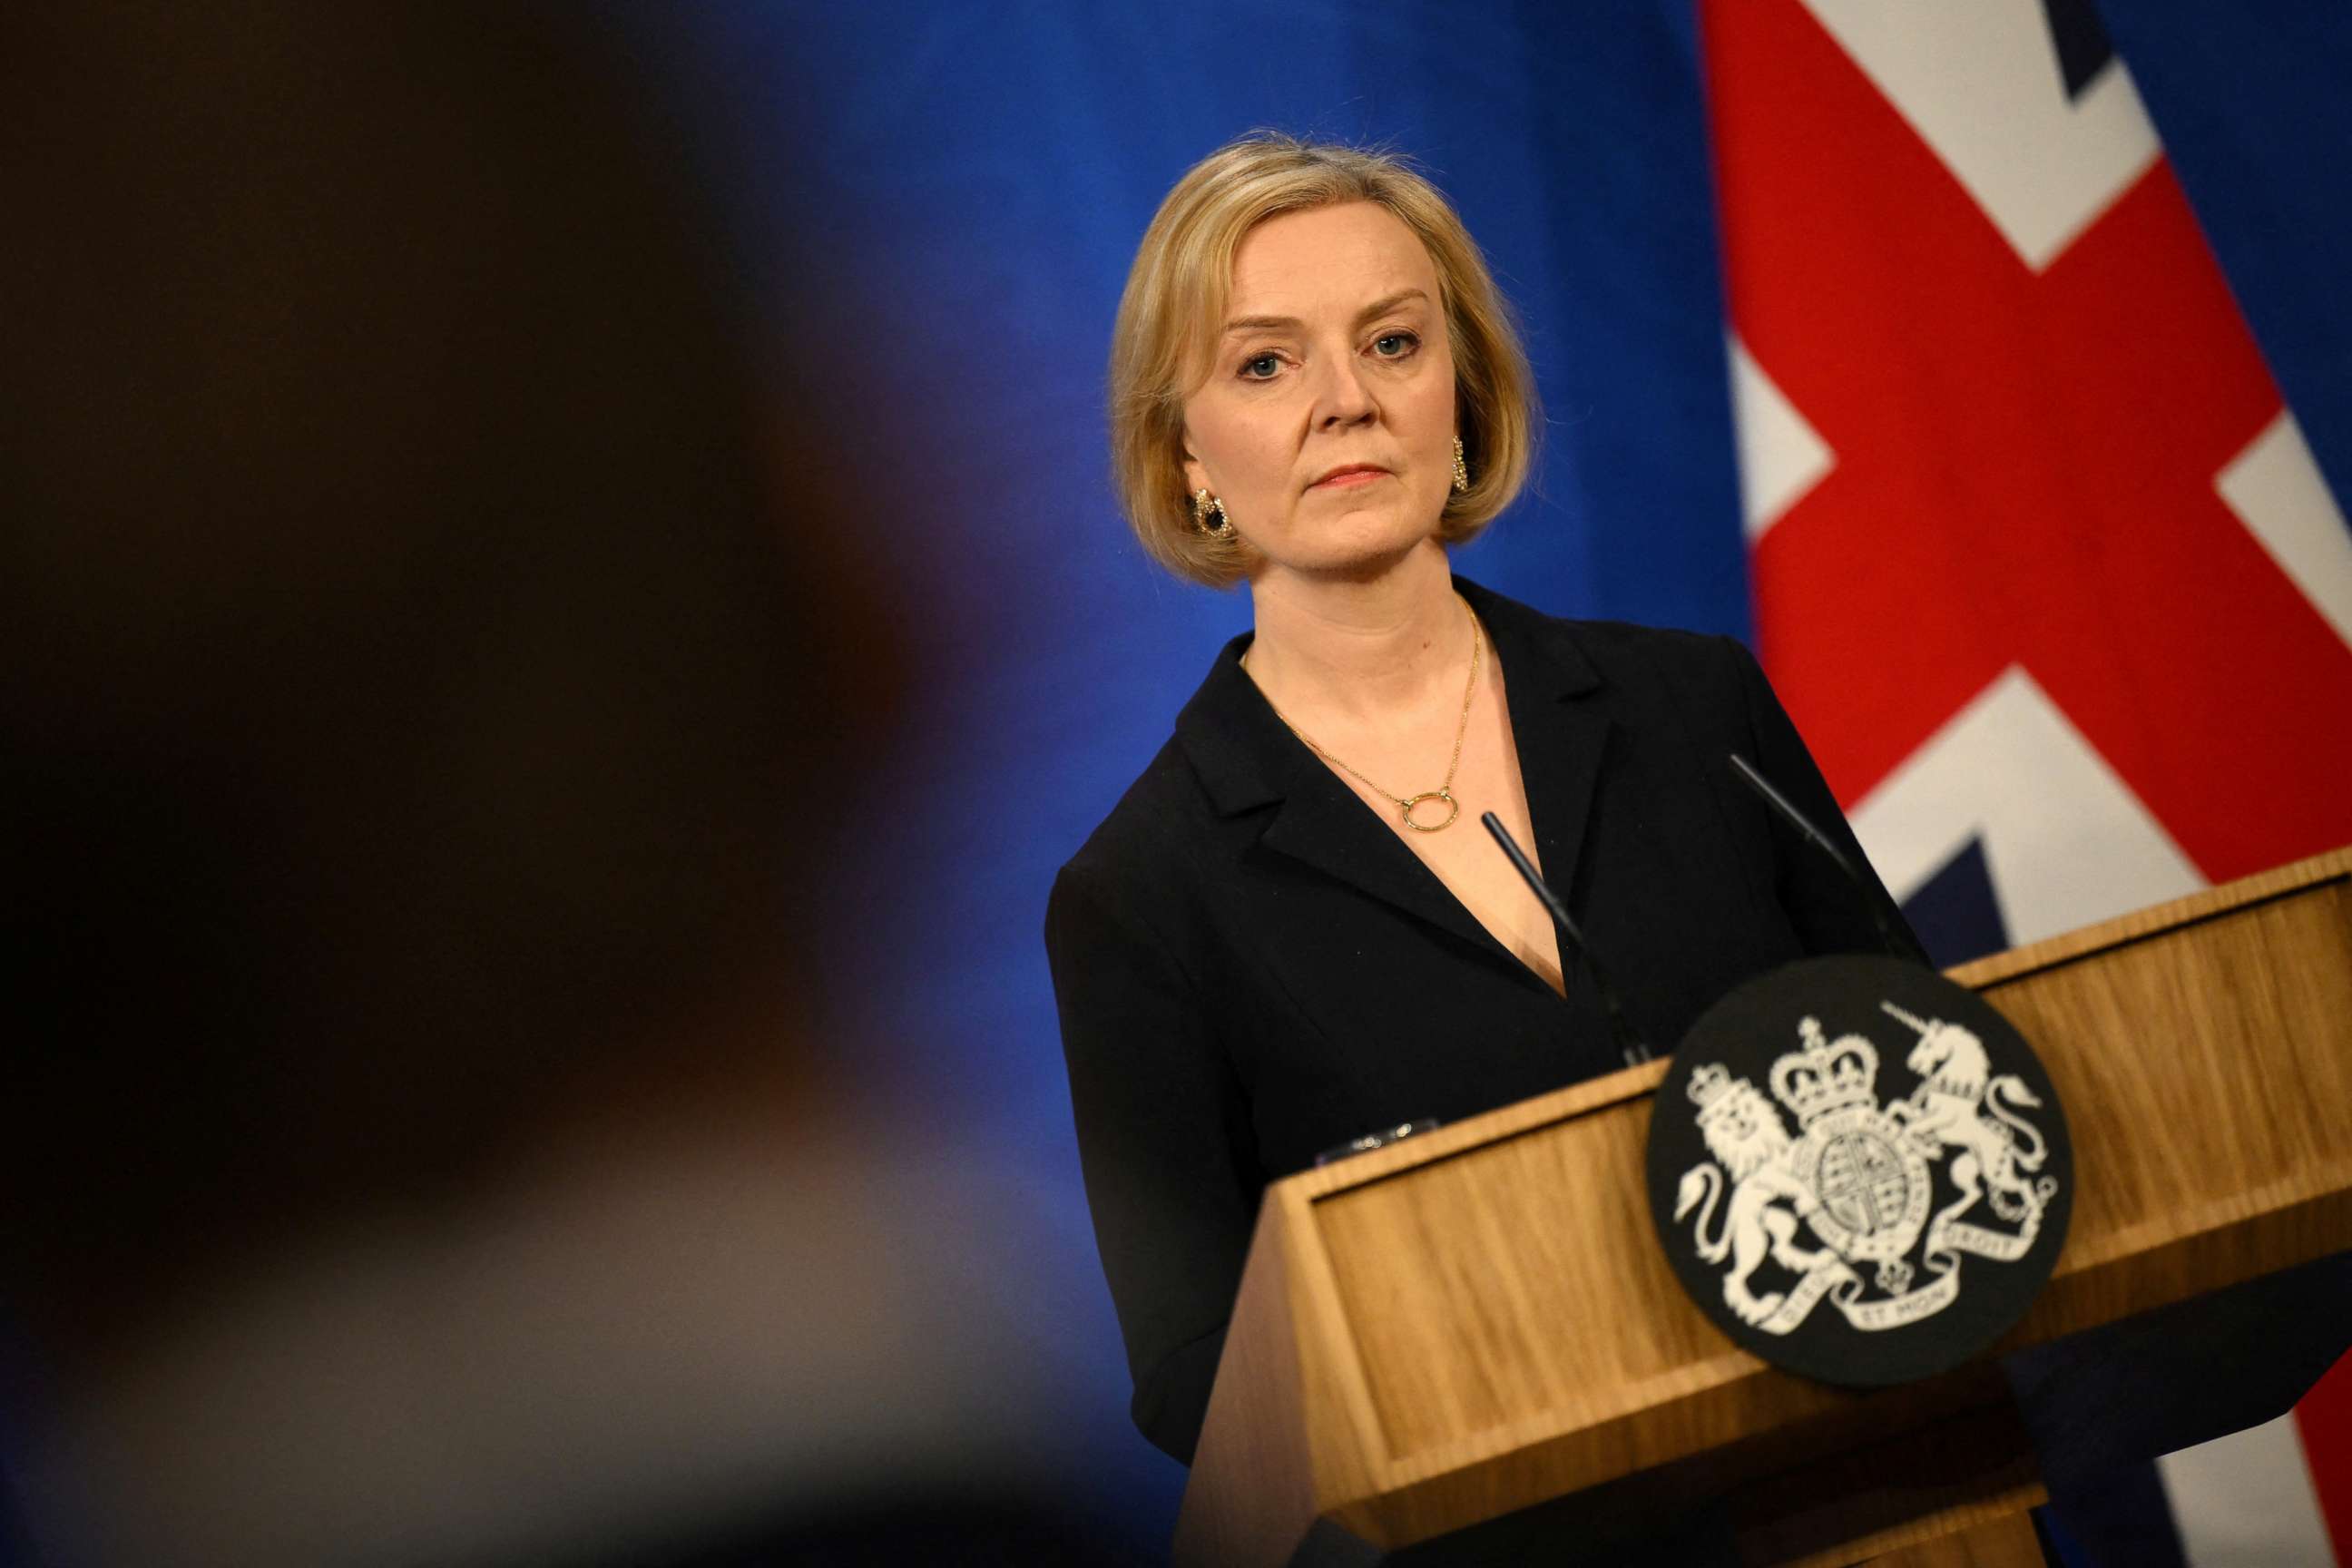 PHOTO: British Prime Minister Liz Truss attends a news conference in London, Britain, on Oct. 14, 2022.